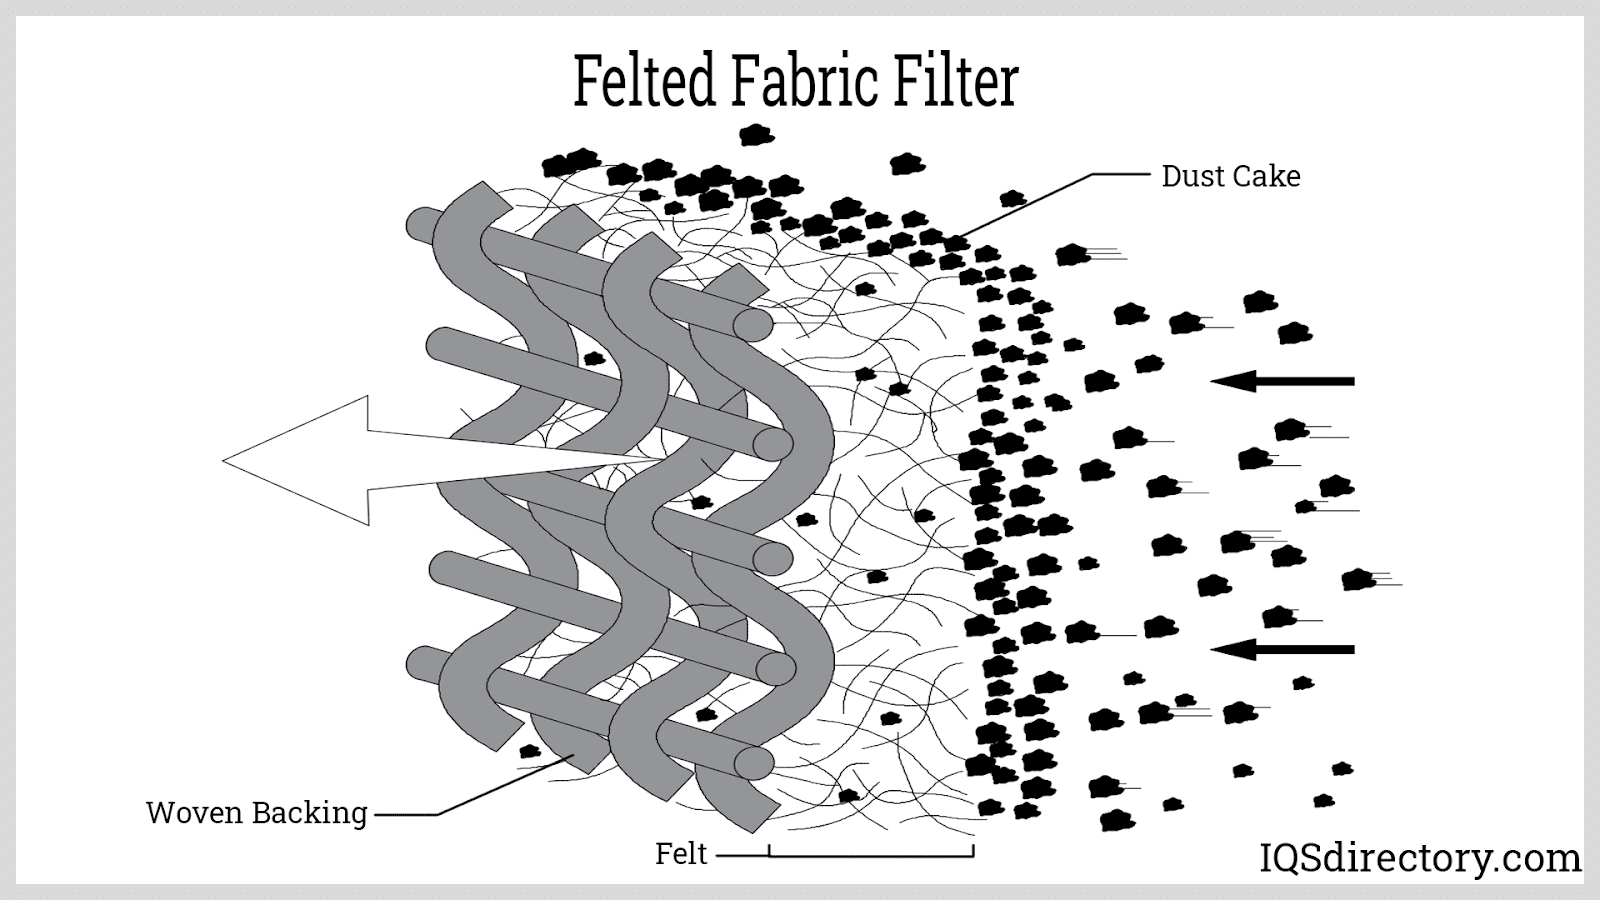 Felted Fabric Filter